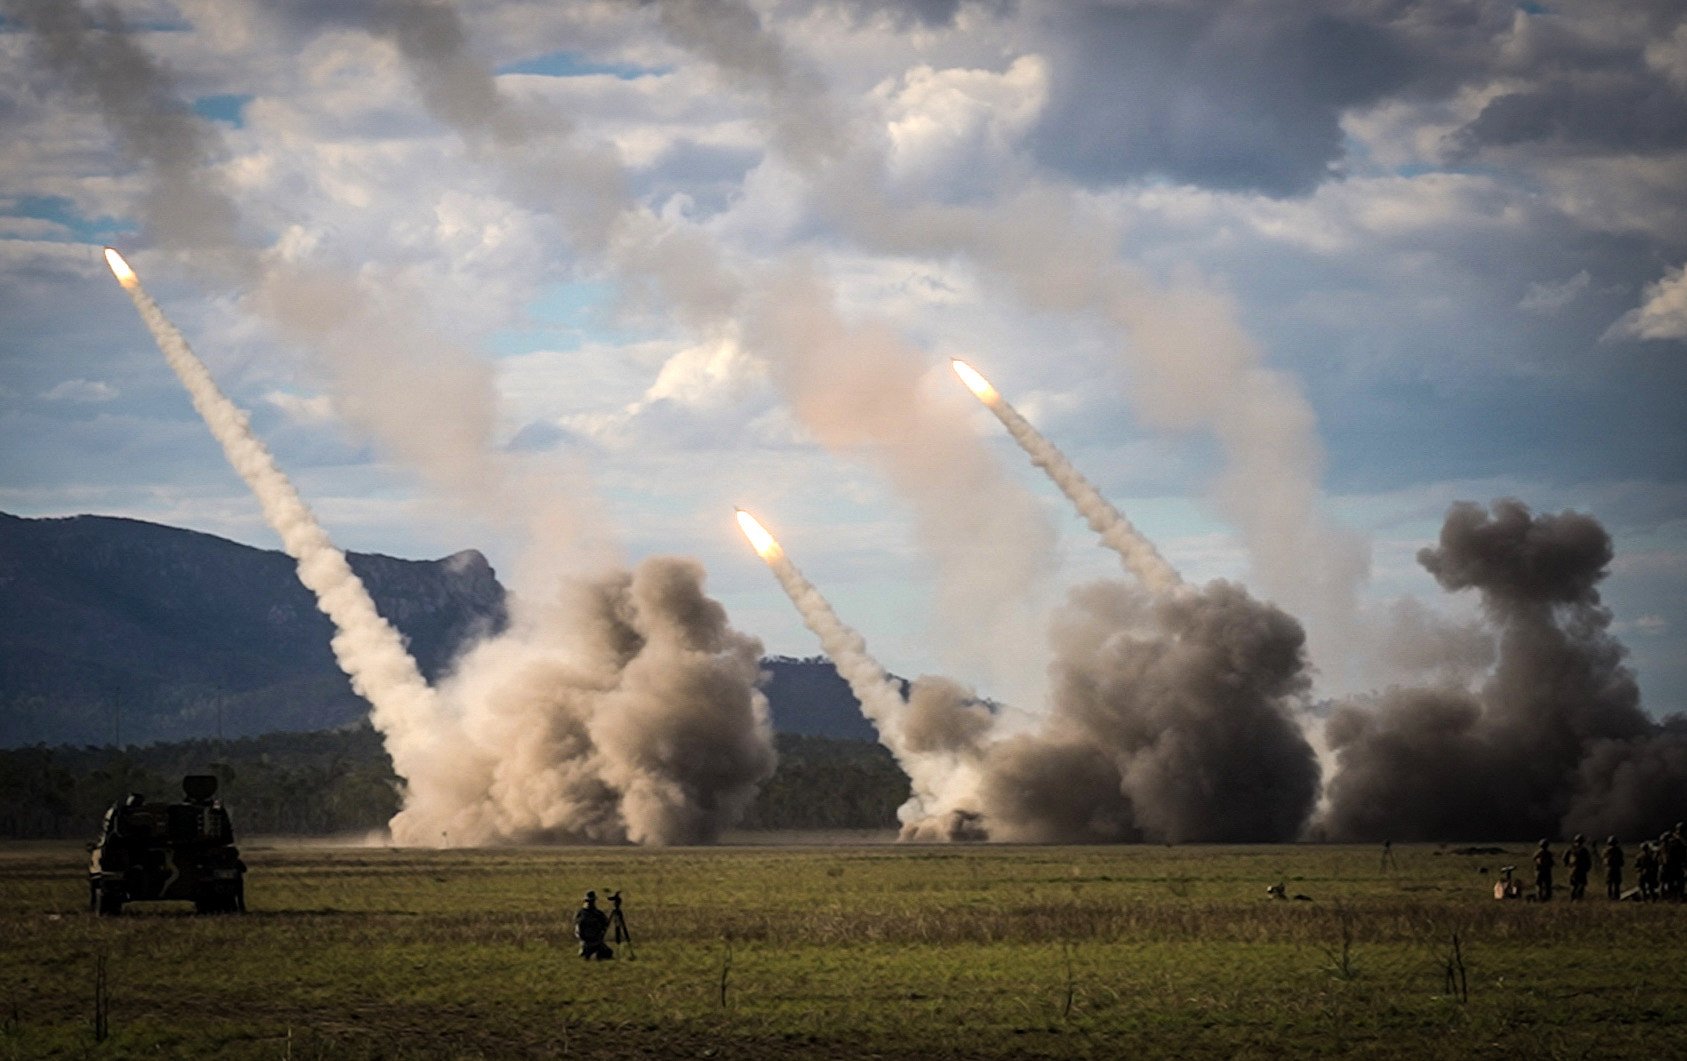 A missile is launched during joint military drills at a firing range in northern Australia as part of Exercise Talisman Sabre, the largest combined training activity between the Australian Defence Force and the United States military, in Shoalwater Bay on July 22. Photo: AFP